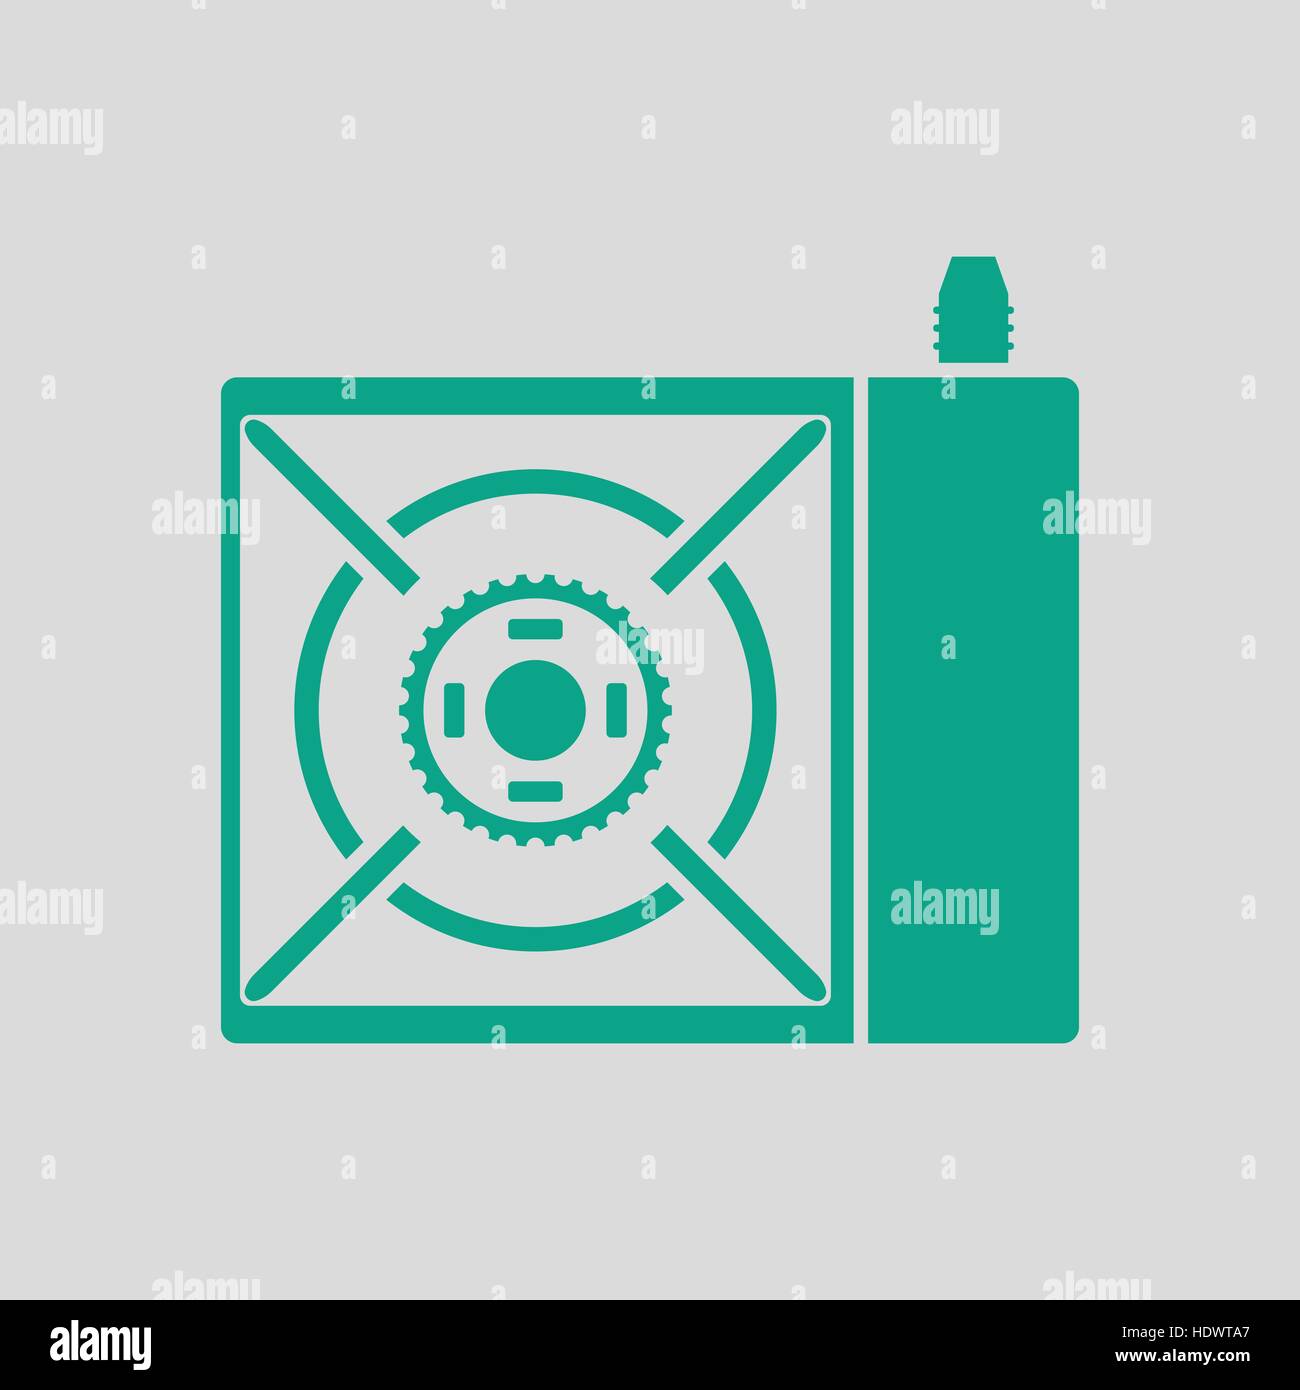 Camping gas burner stove icon. Gray background with green. Vector illustration. Stock Vector